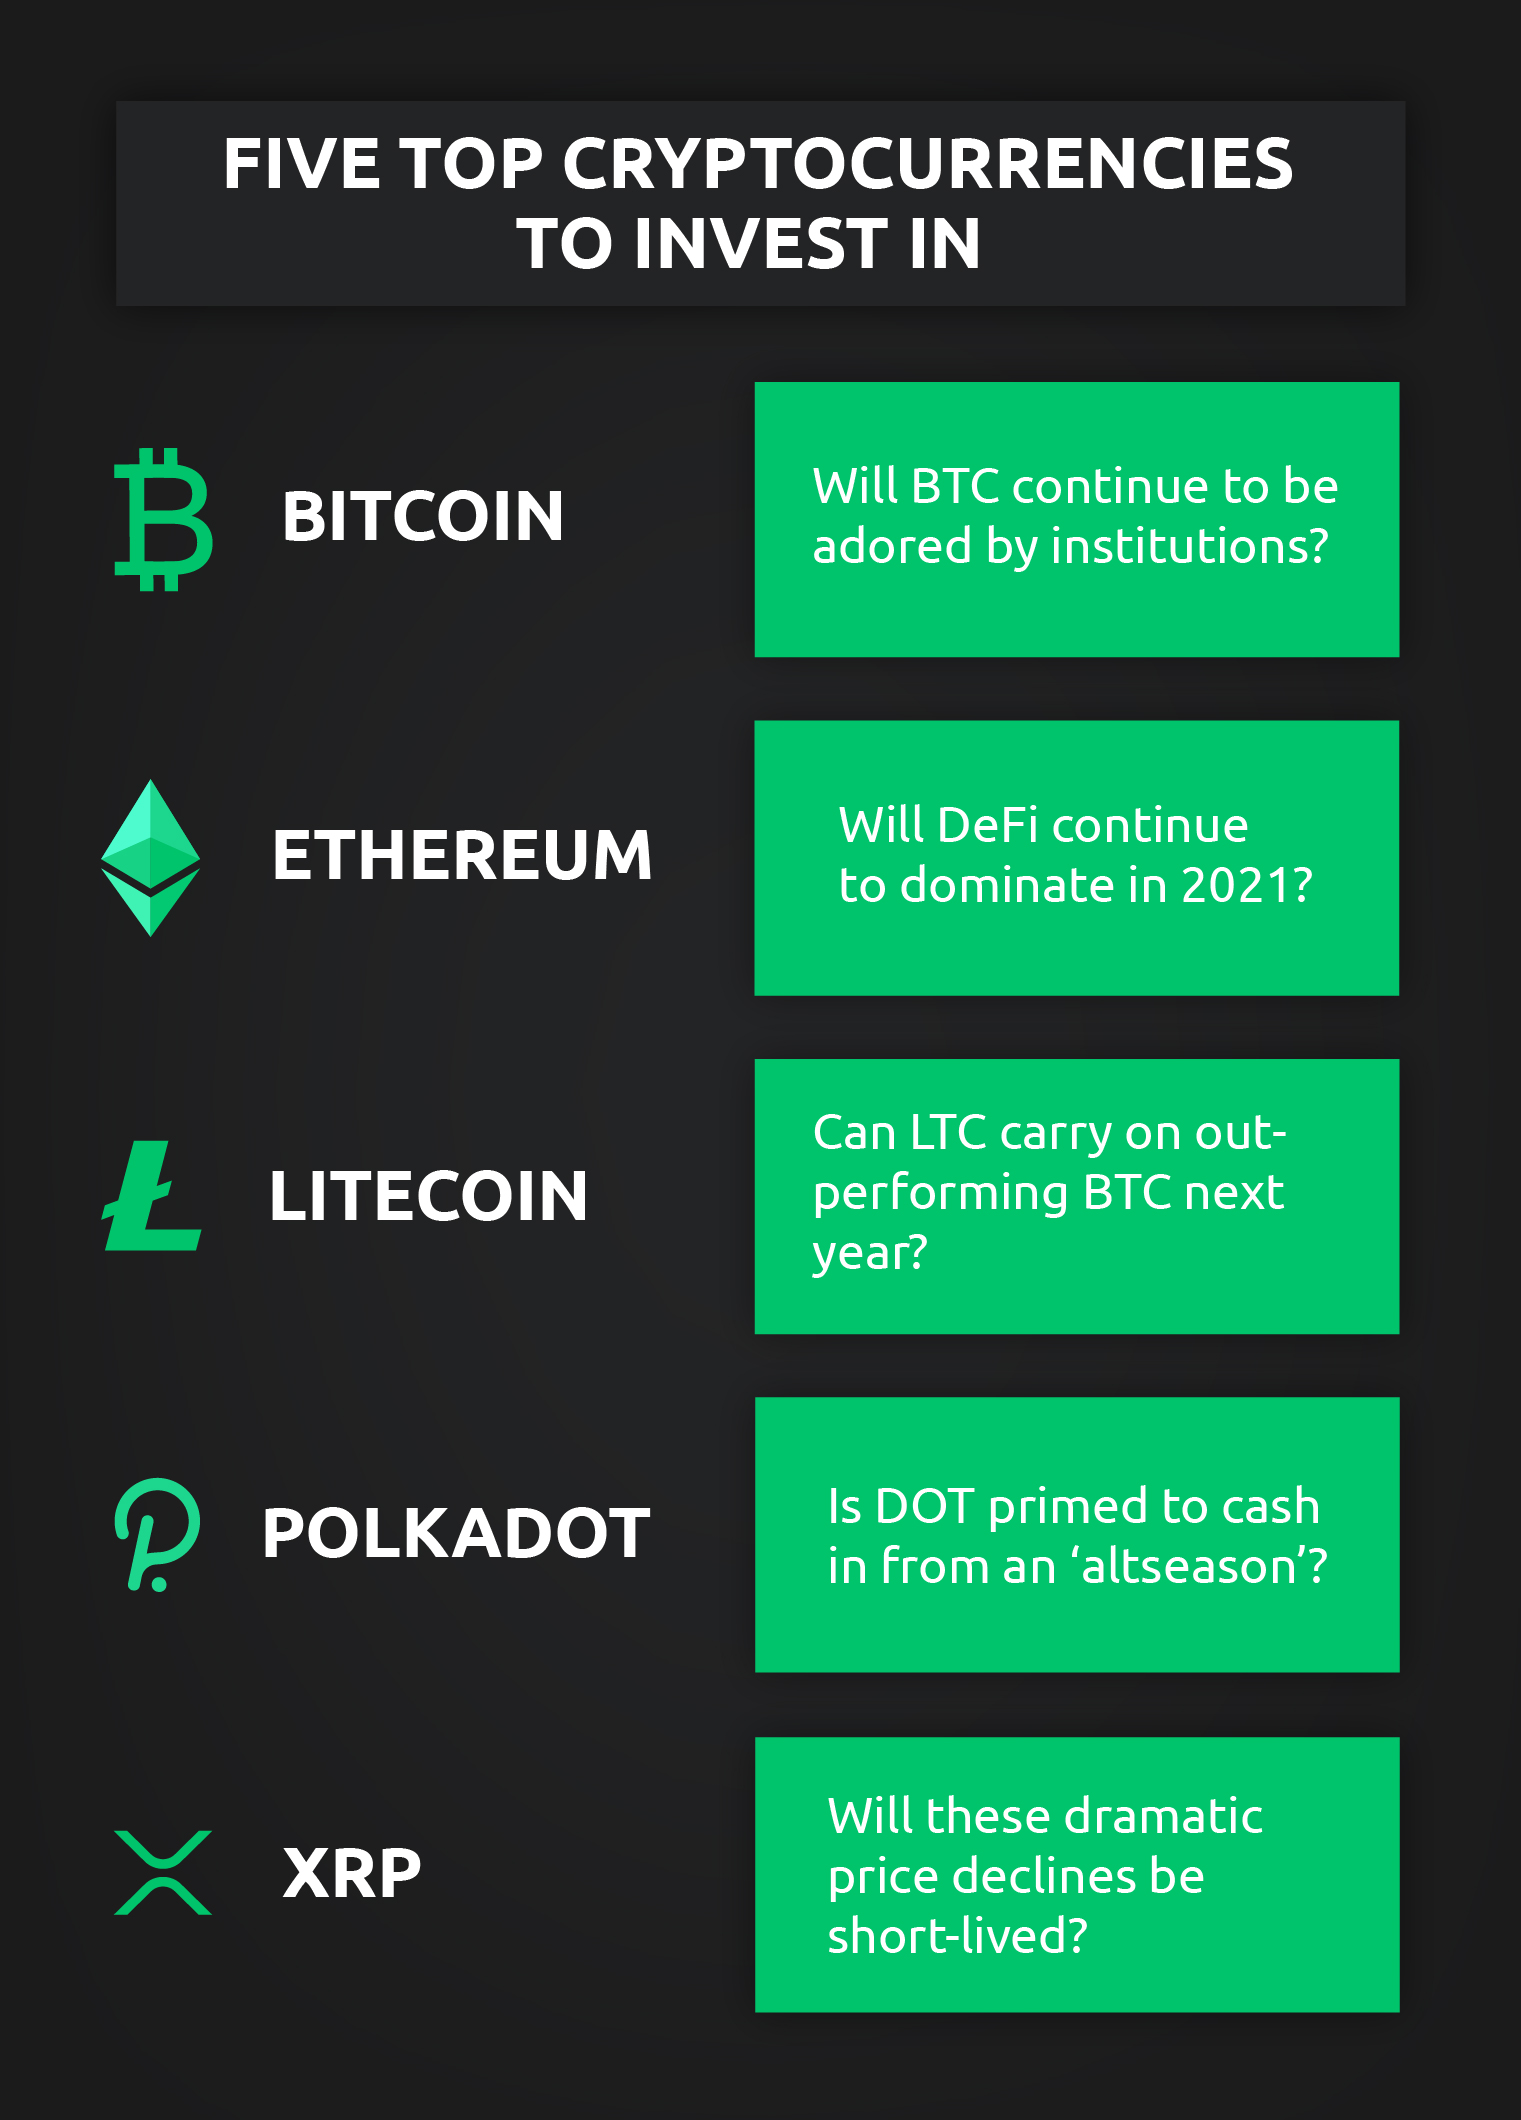 The Top 10 Most Popular Cryptocurrencies To Invest In